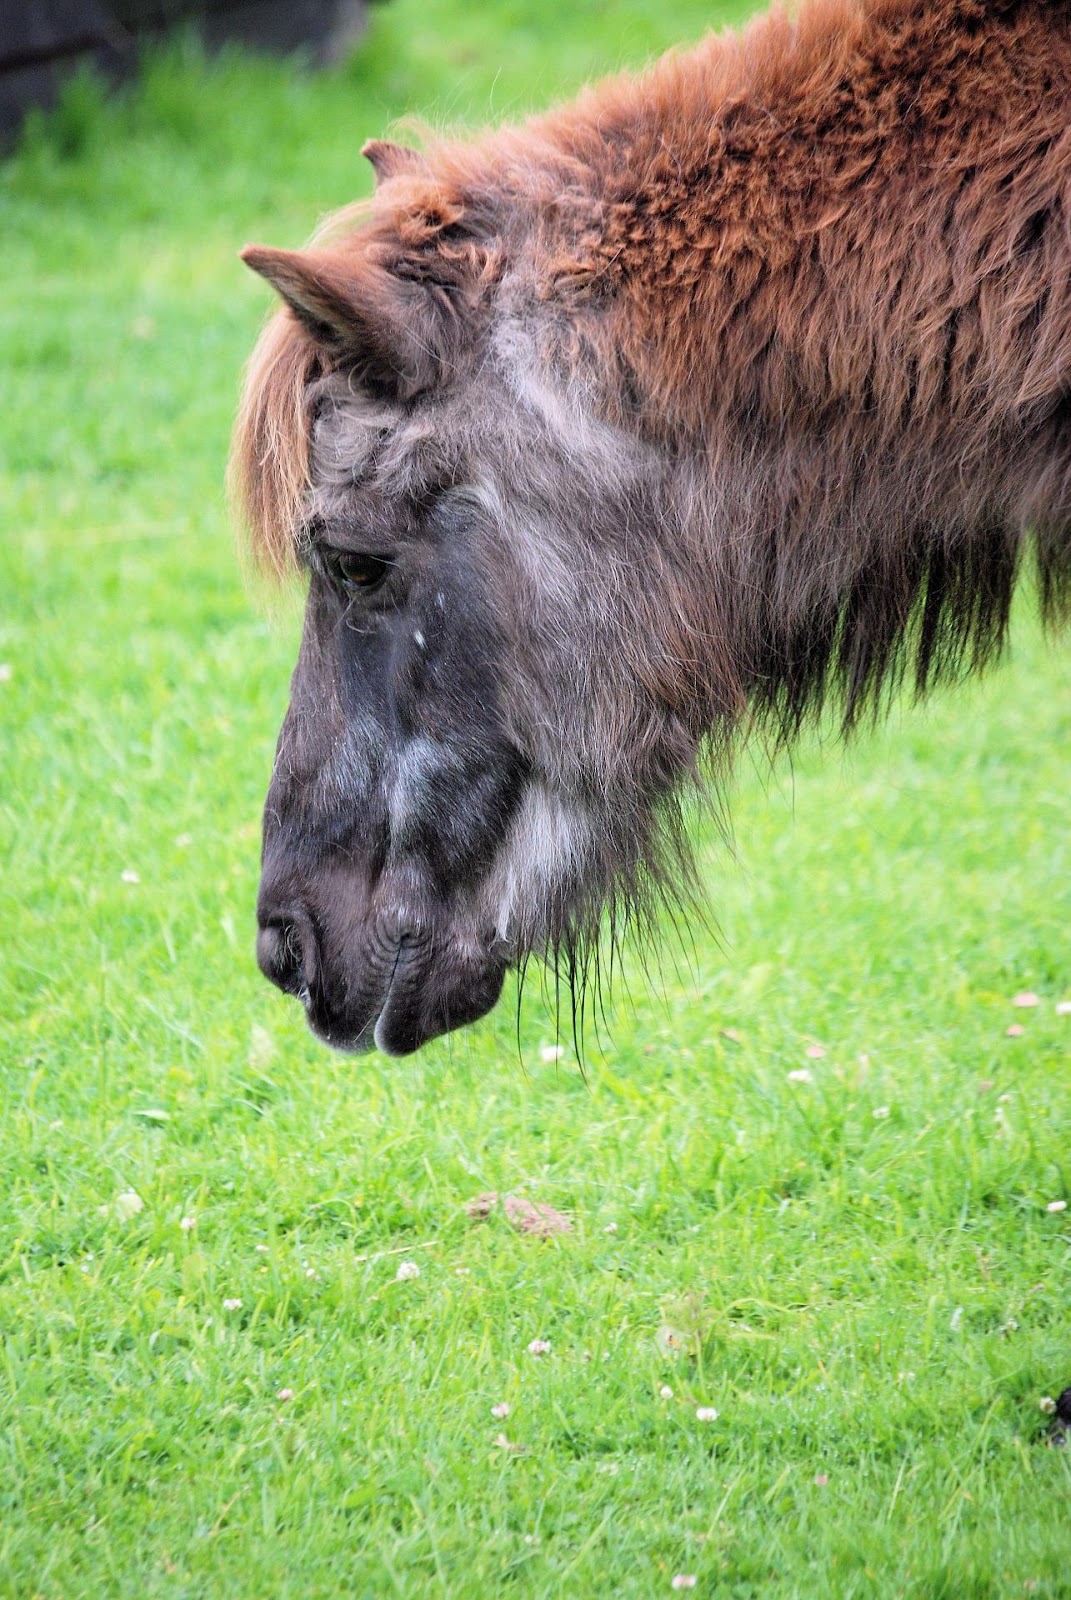 A shaggy old Shetland pony with greying face has Cushings